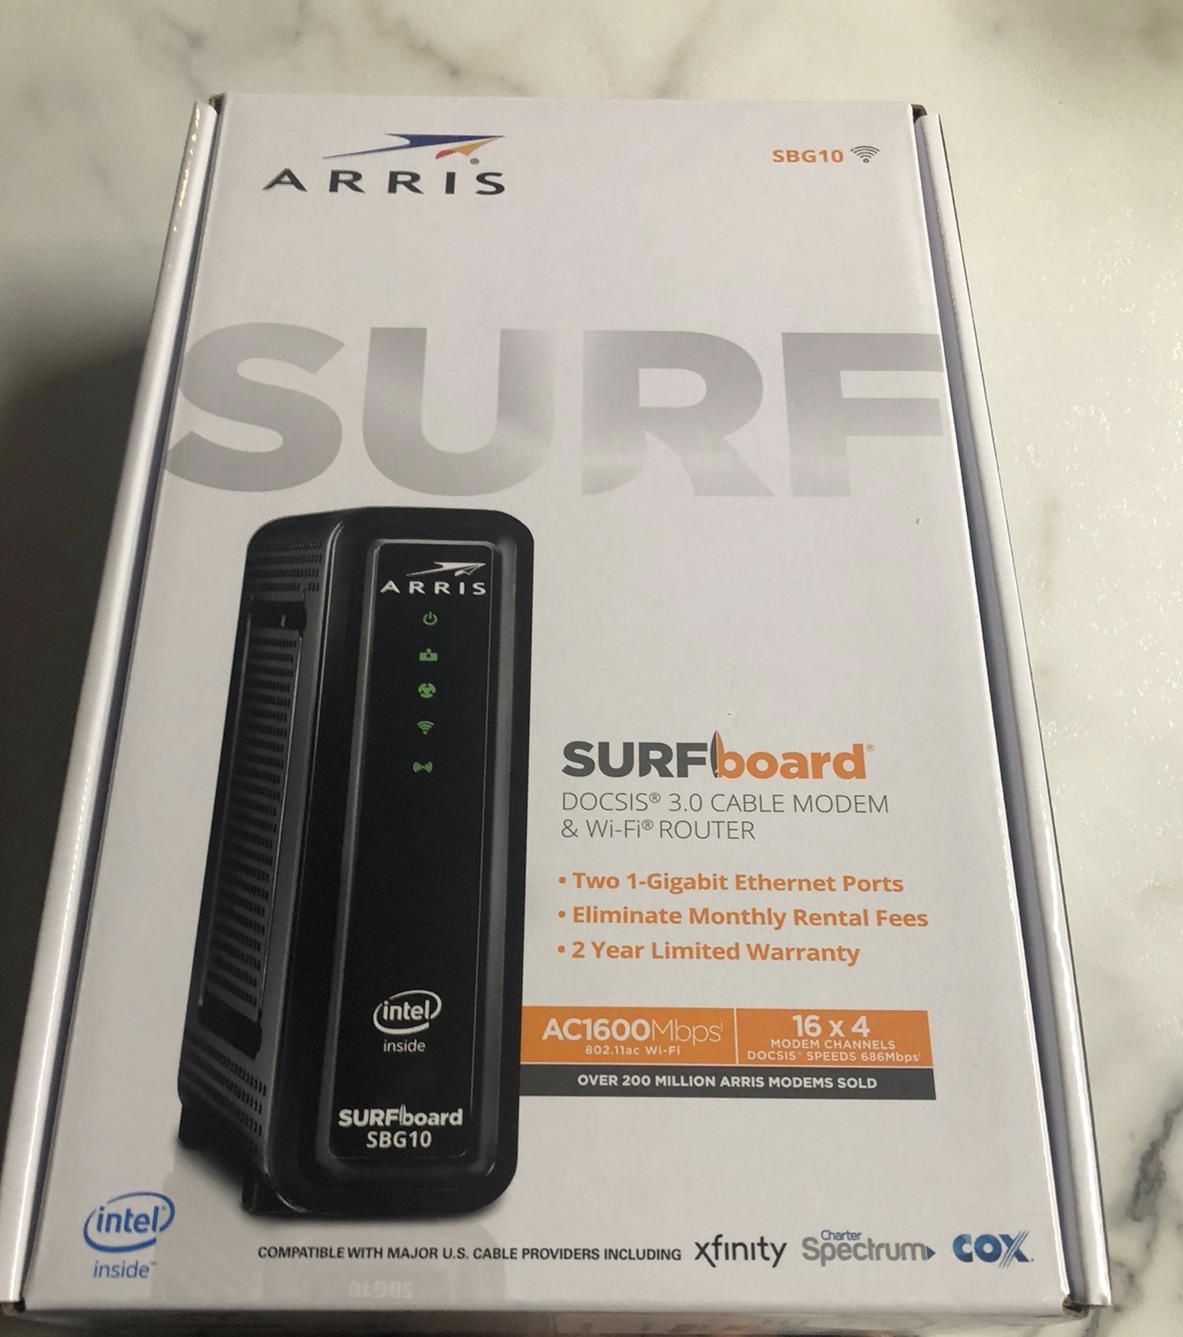 Arris router and modem combo.